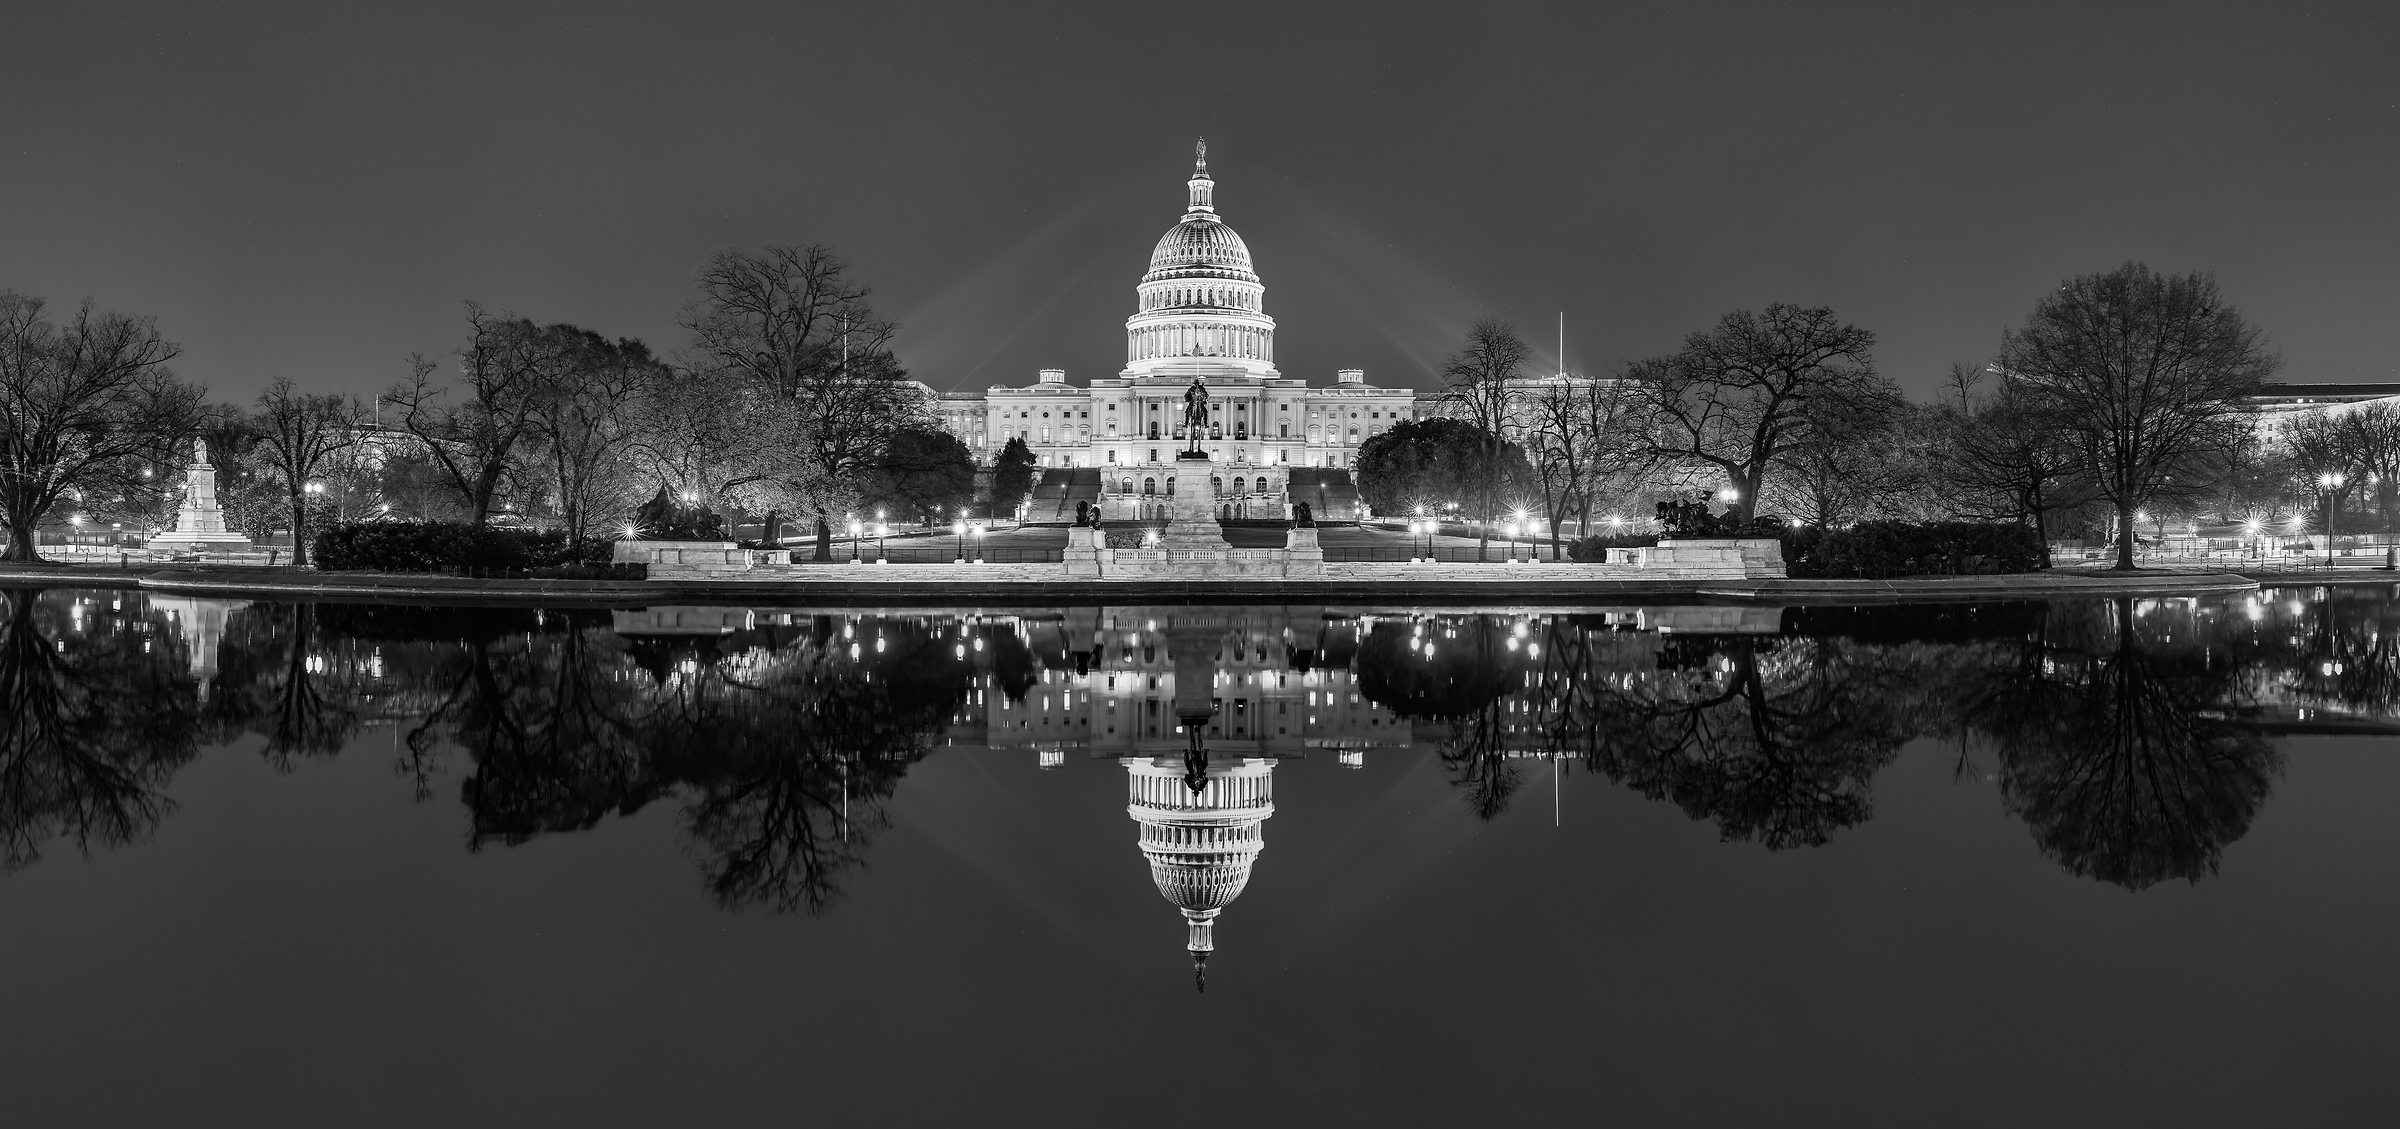 1,567 megapixels! A very high resolution, fine art photo print of the Capitol Building in Washington DC; photograph created by Tim Lo Monaco on the United States Capitol Grounds, Washington, D.C.